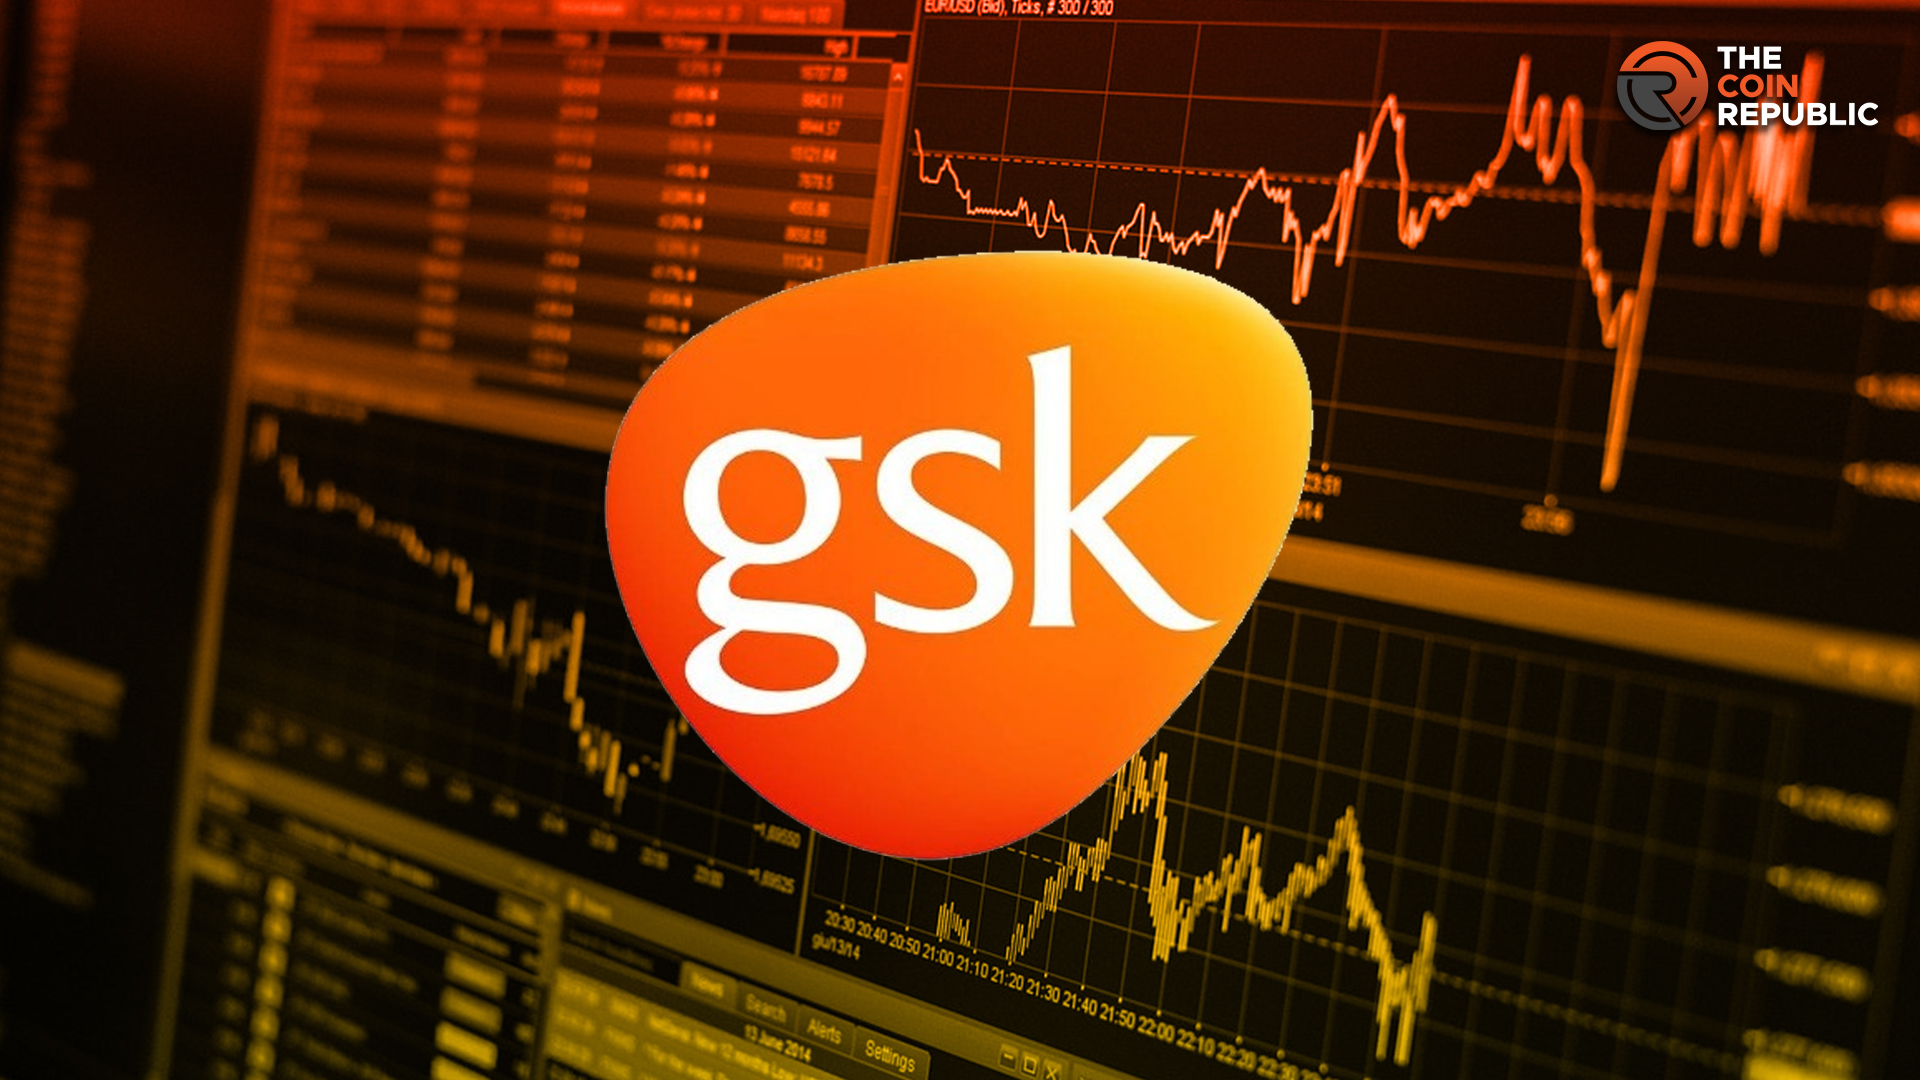 GSK Plc (NYSE: GSK): Gsk Stock Ready For A Blast, Analysts Says?